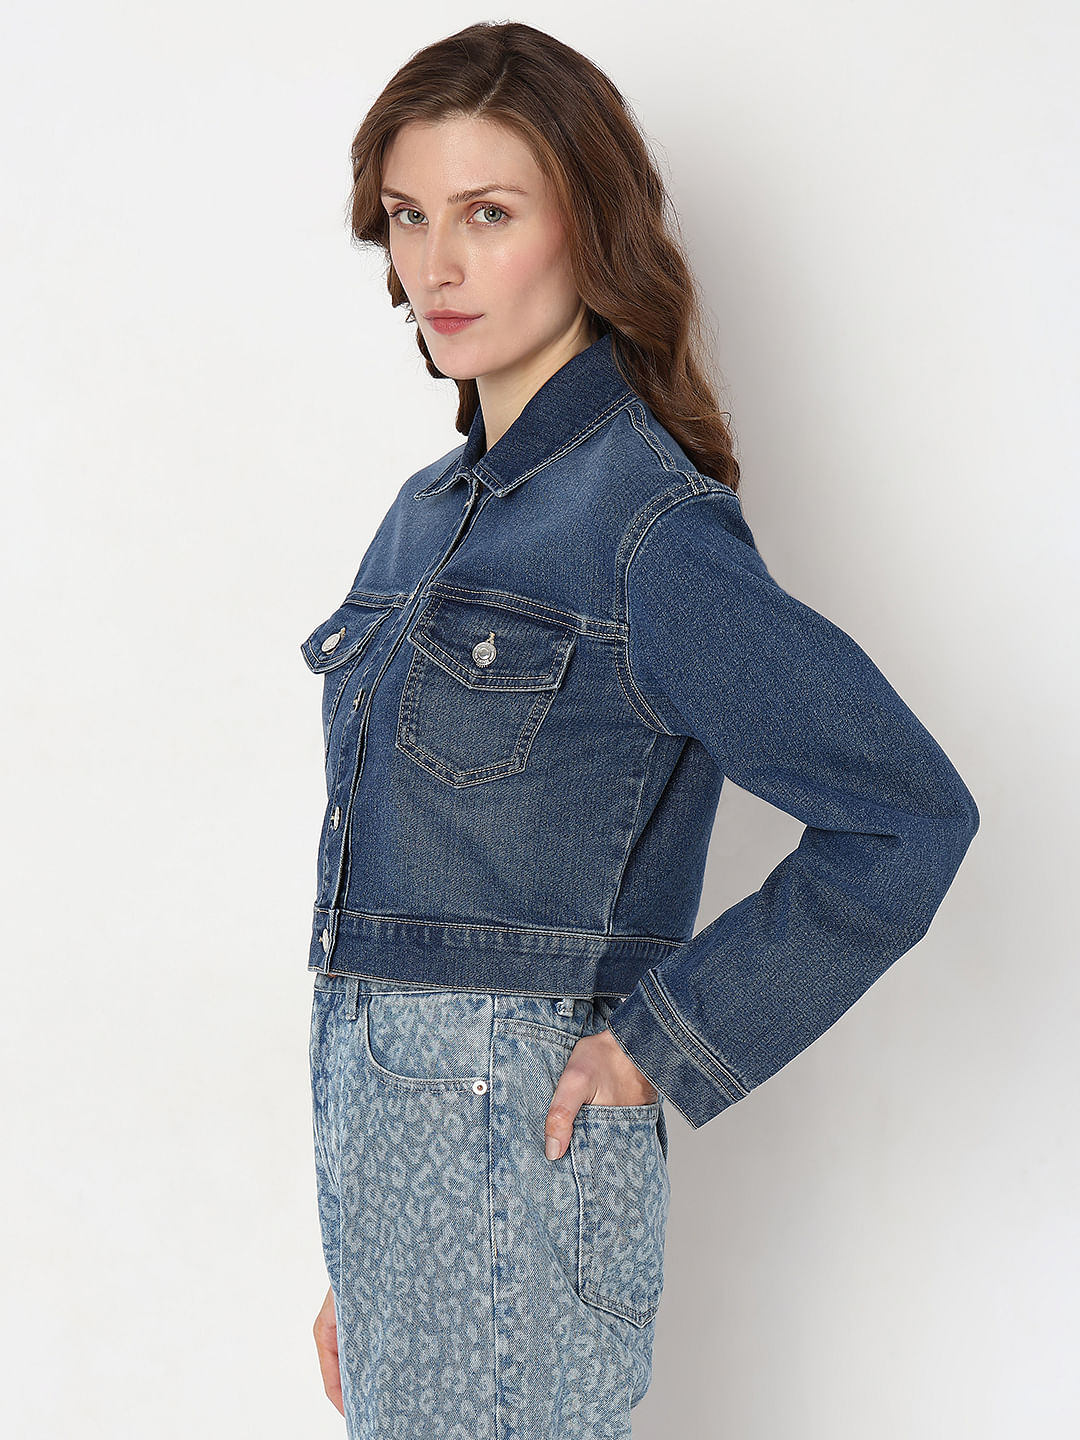 Denim Jacket in Dark Classic Indigo Wash - a darker wash that's a great  option for you too. | How to wear denim jacket, Jacket outfit women, Denim  jacket women